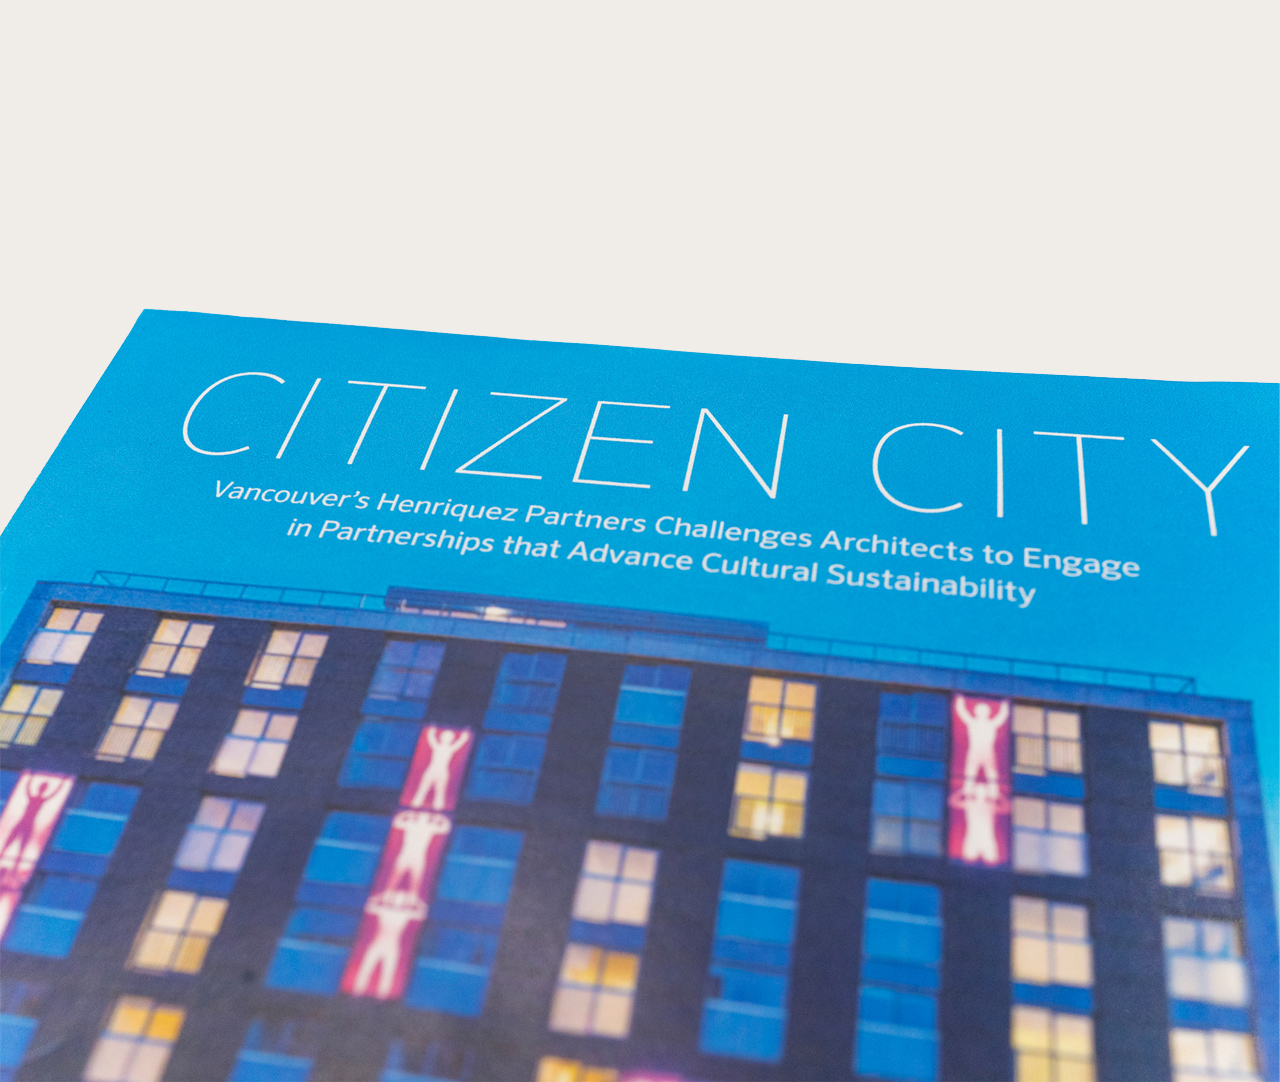 Detail of Citizen City book cover.